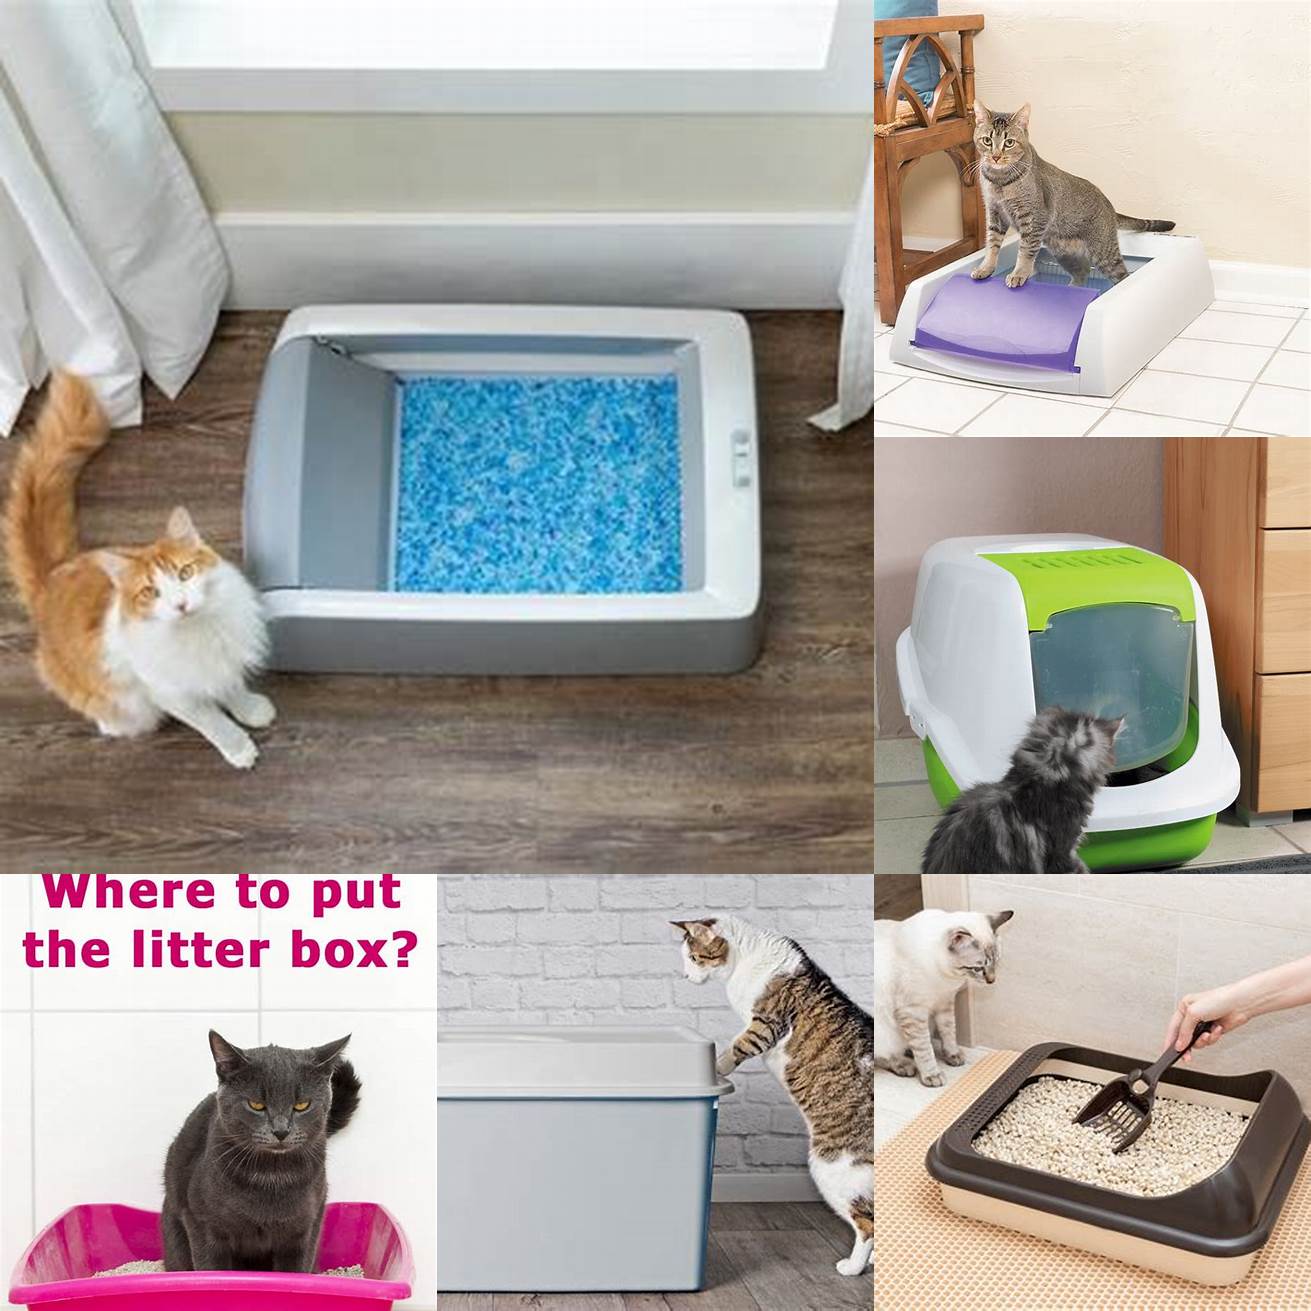 3 Place the litter box in a quiet and accessible location